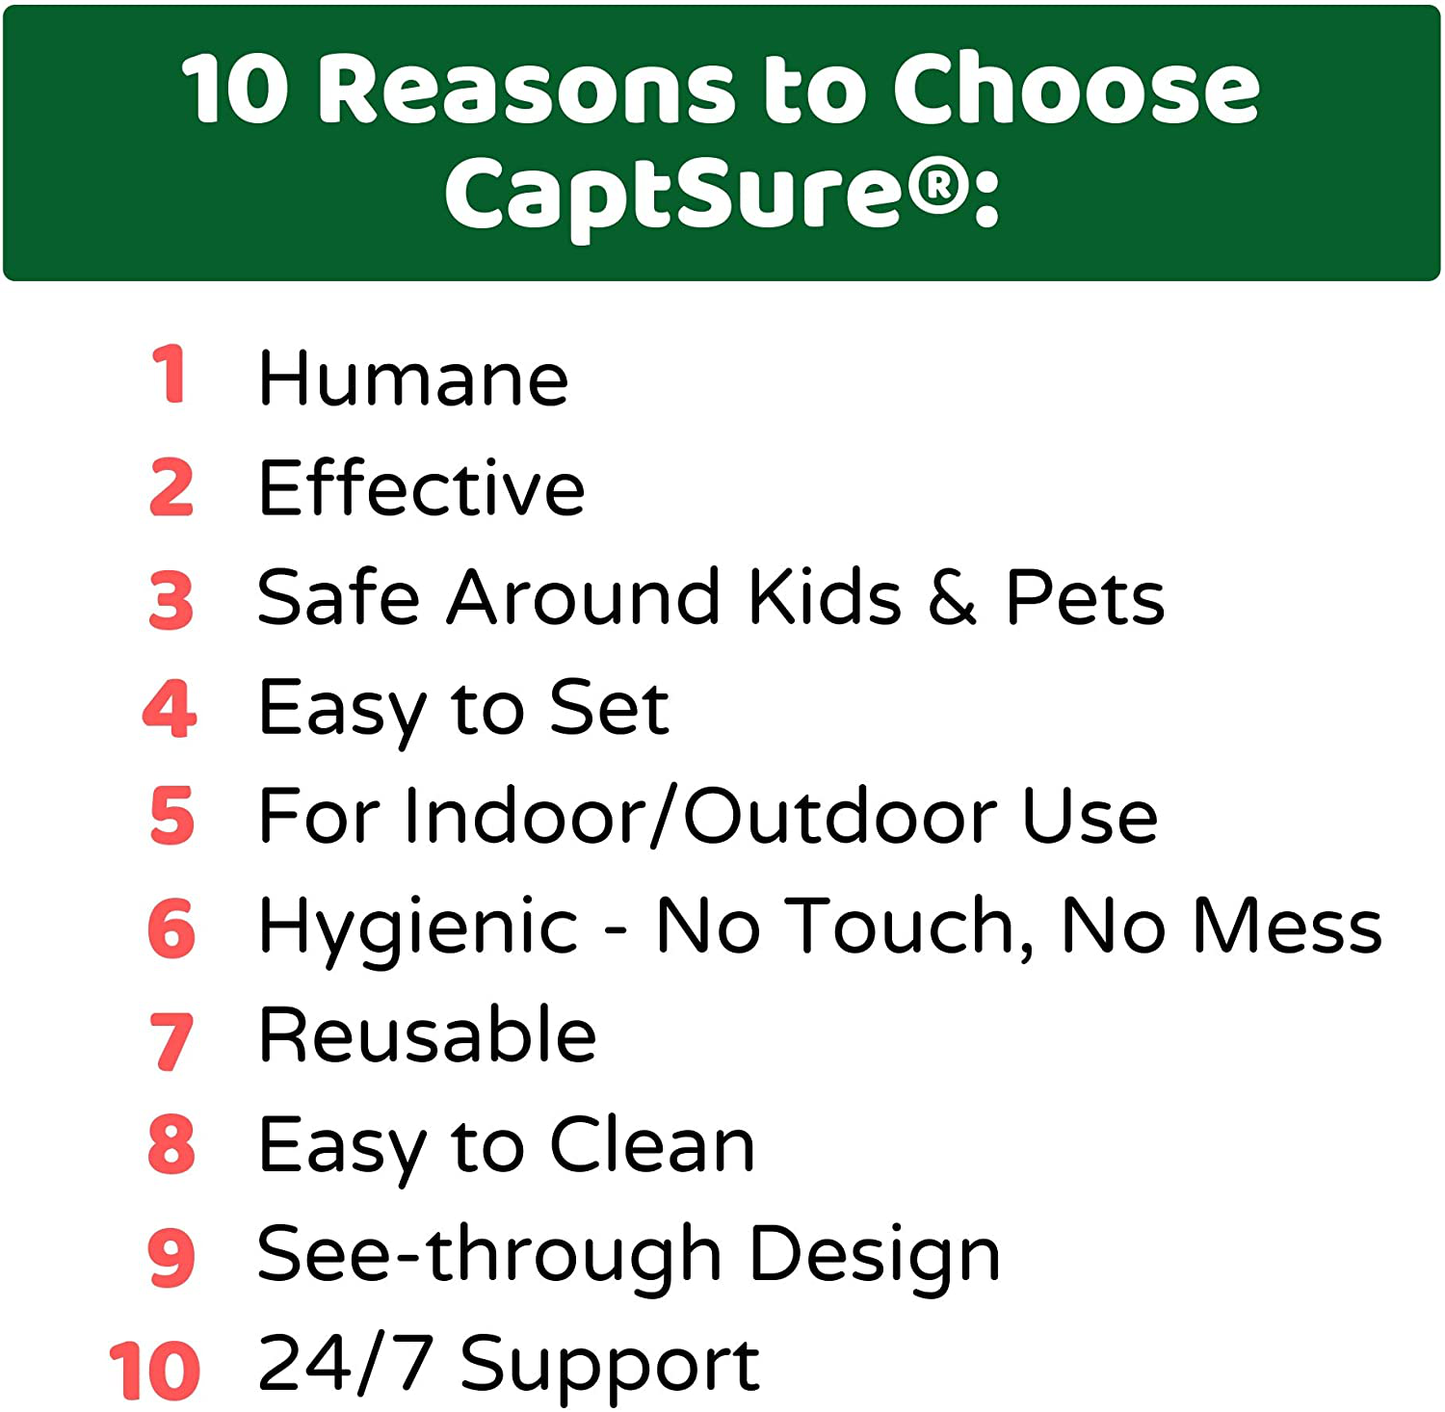 Captsure Original Humane Mouse Traps, Easy to Set, Kids/Pets Safe, Reusable for Indoor/Outdoor Use, for Small Rodent/Voles/Hamsters/Moles Catcher That Works. 2 Pack (Small)